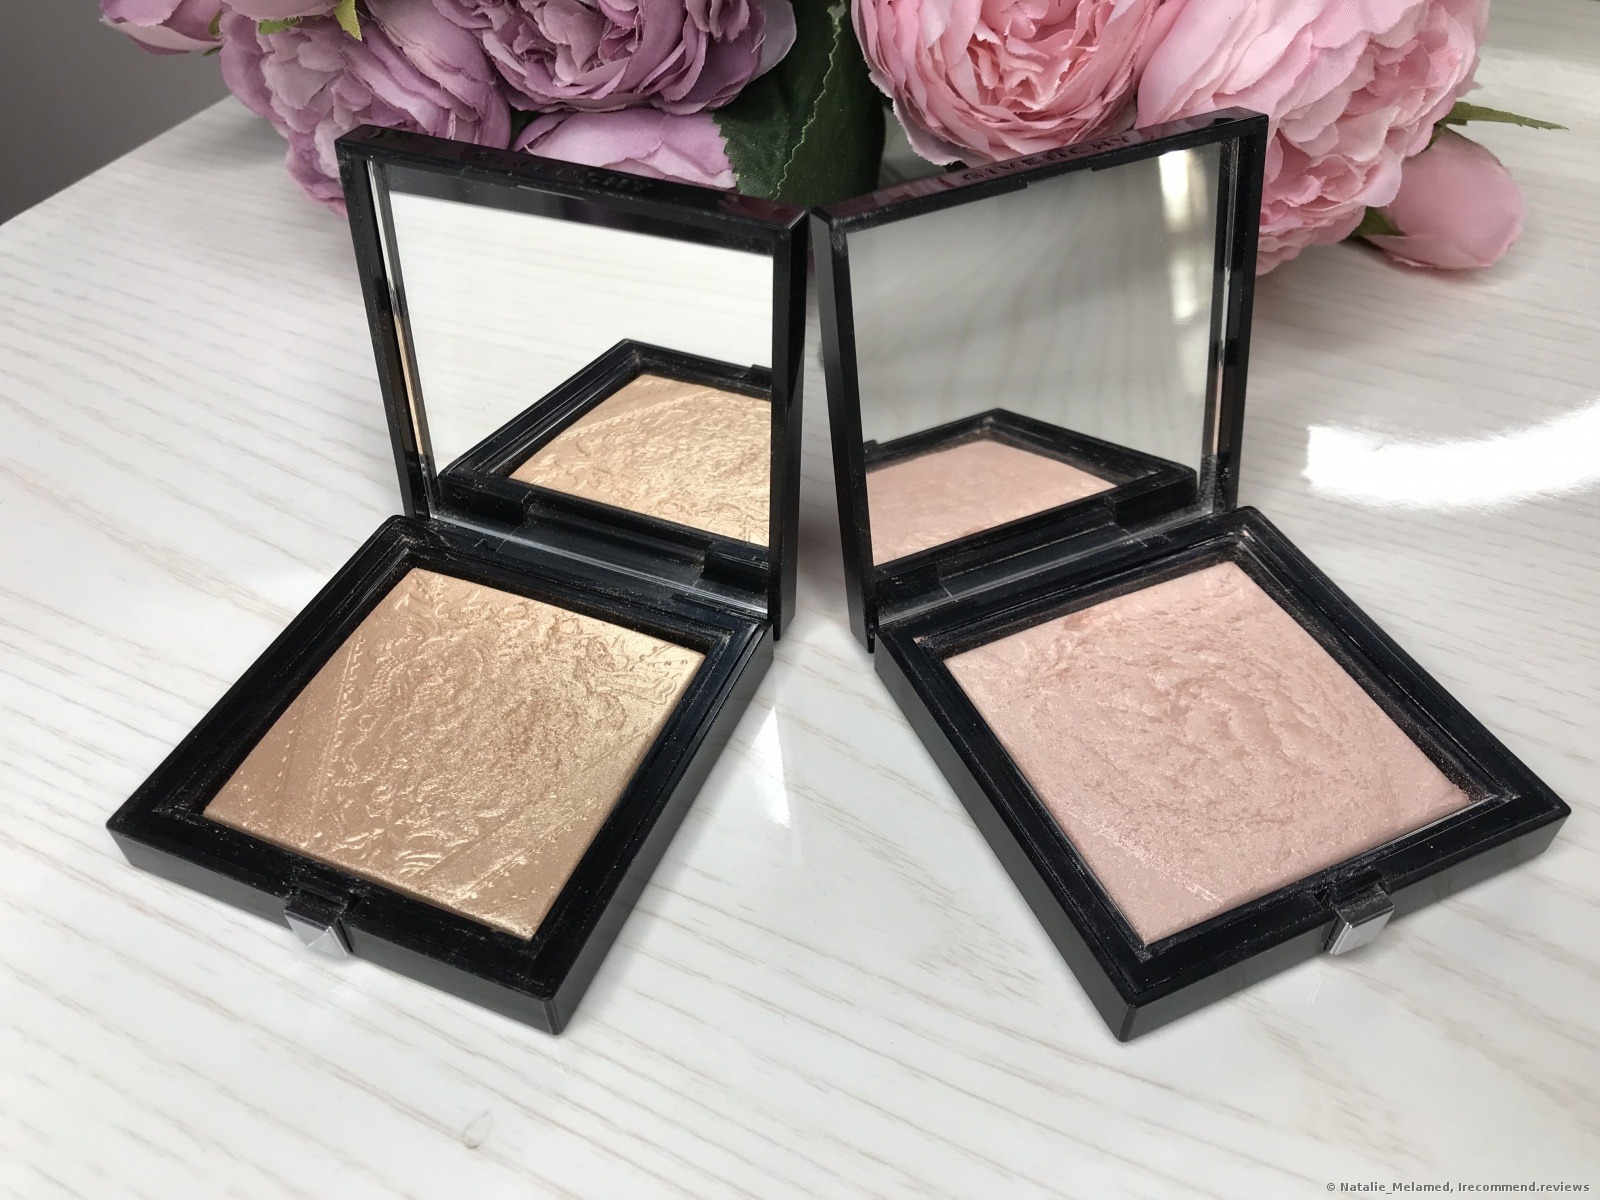 Givenchy Teint Couture Shimmer Powder - «Eternal sunshine of the